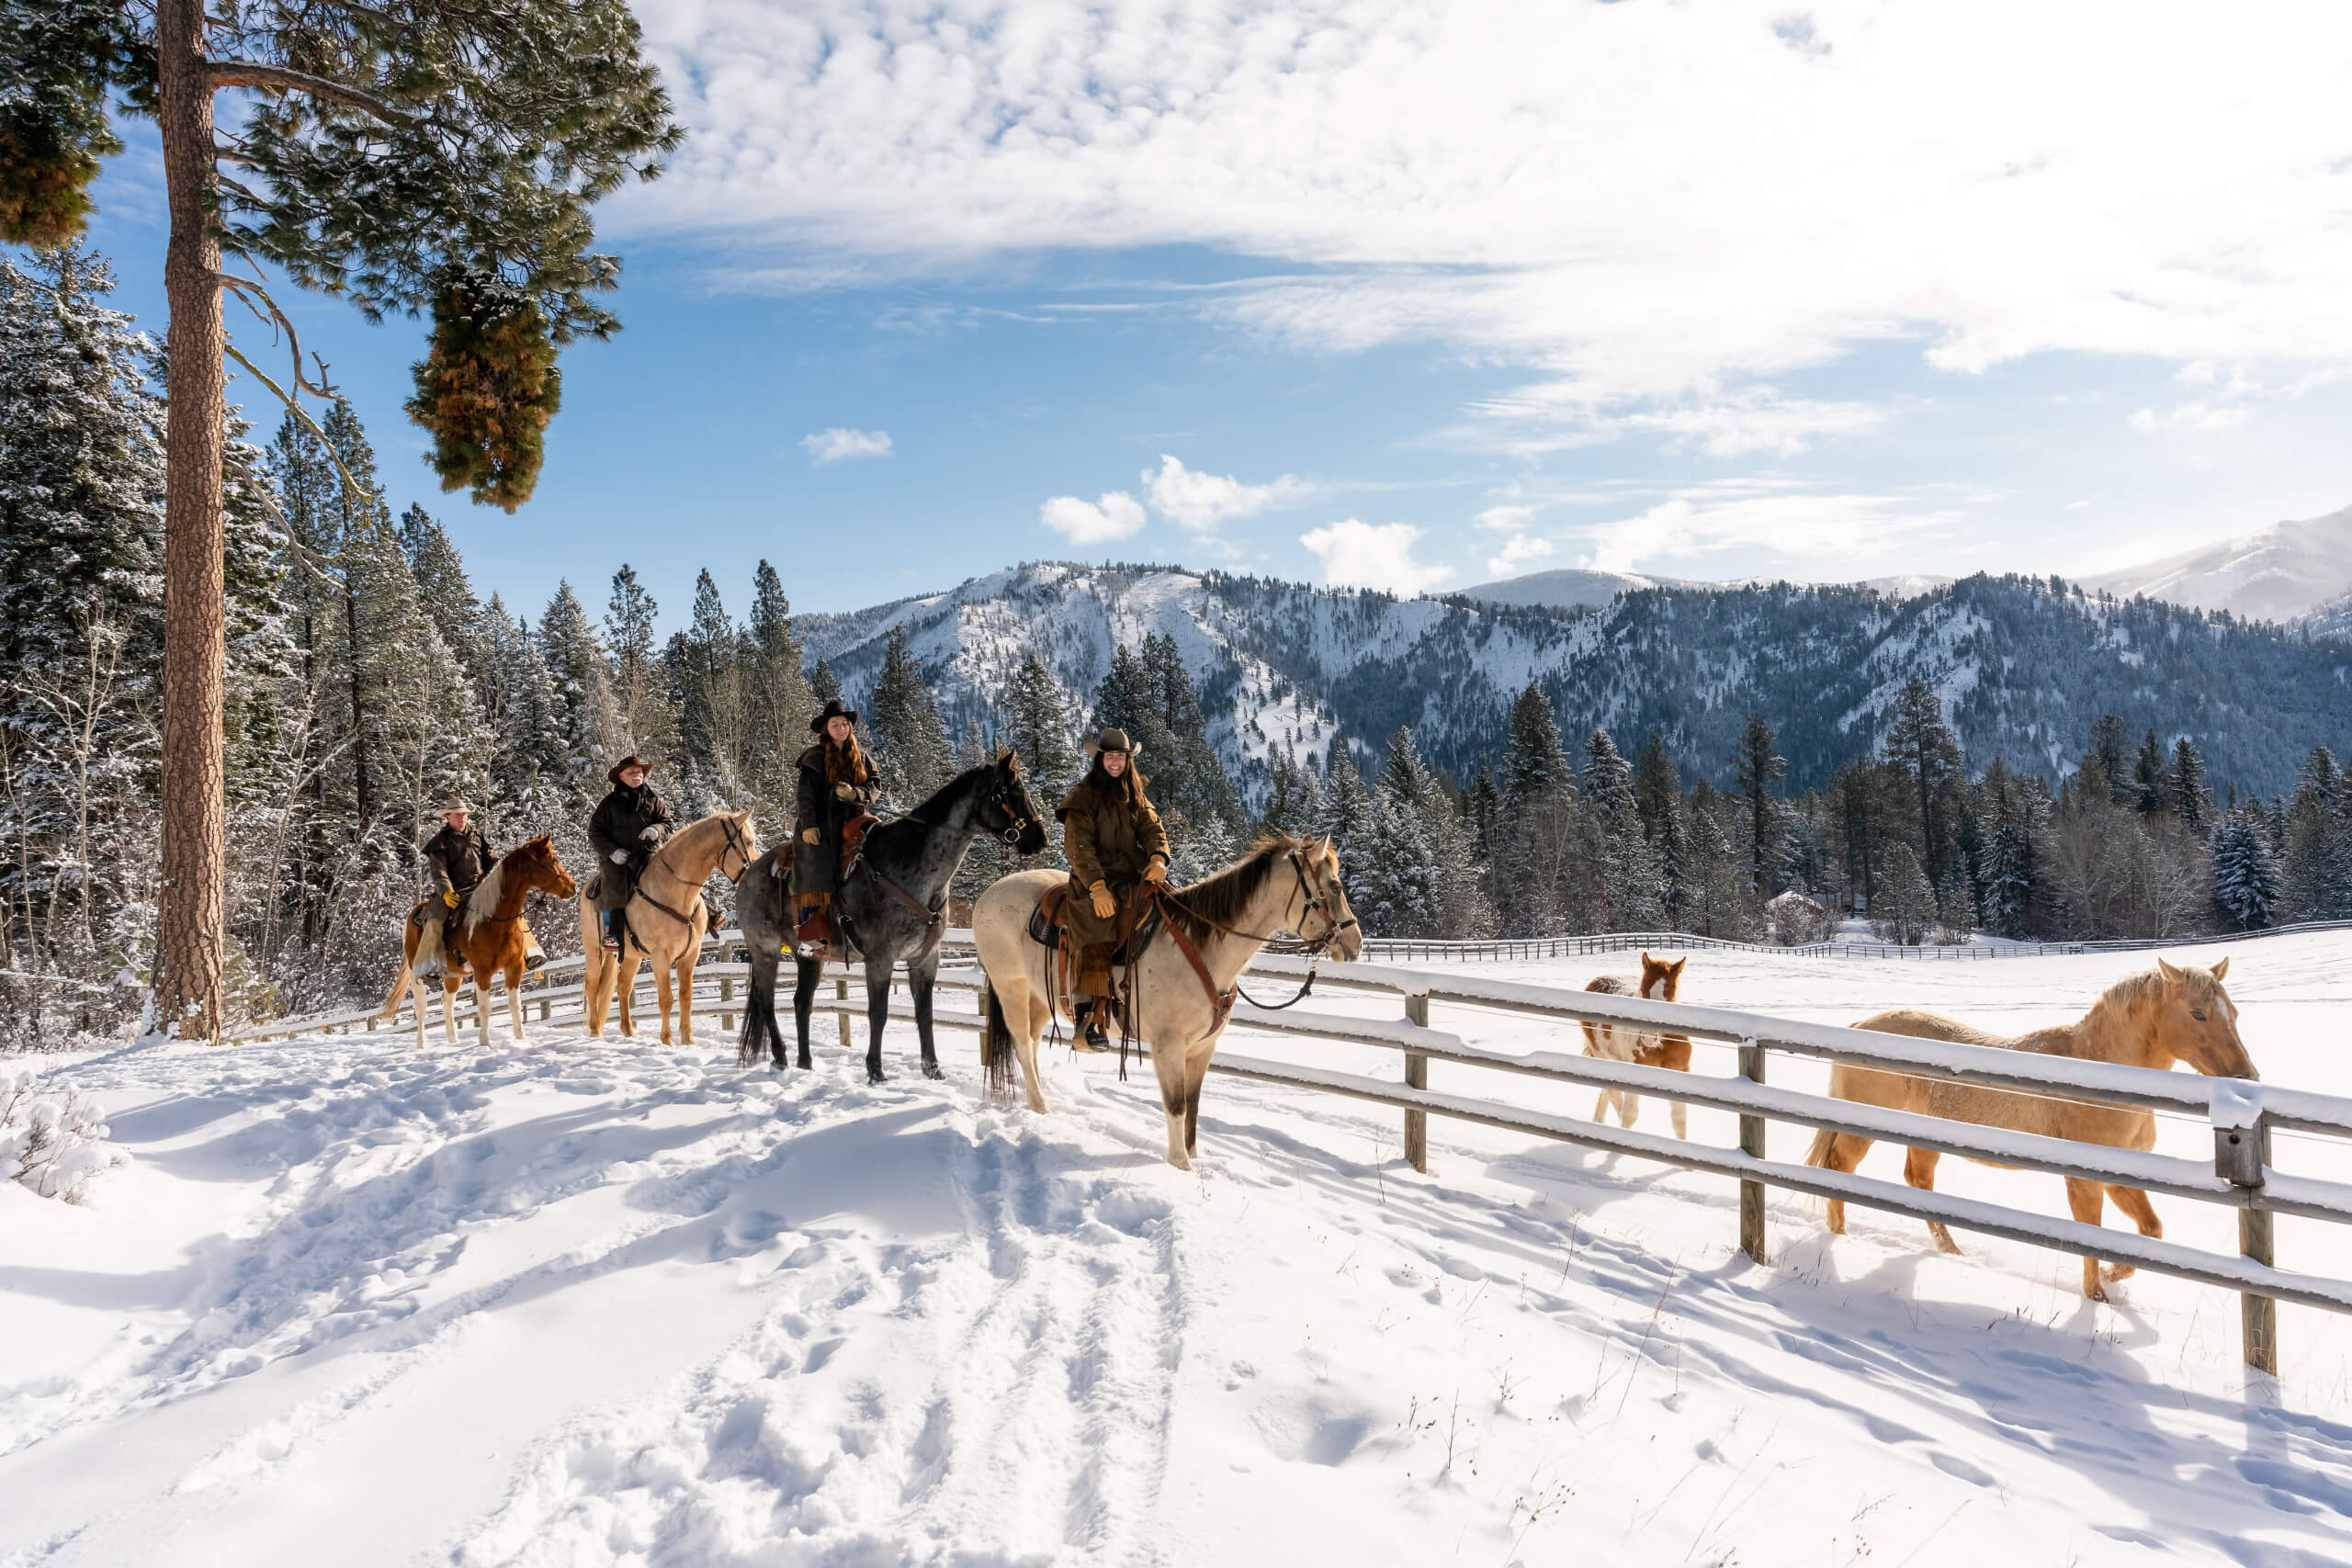 Horseback riding in the snow with a beautiful Mountain View.